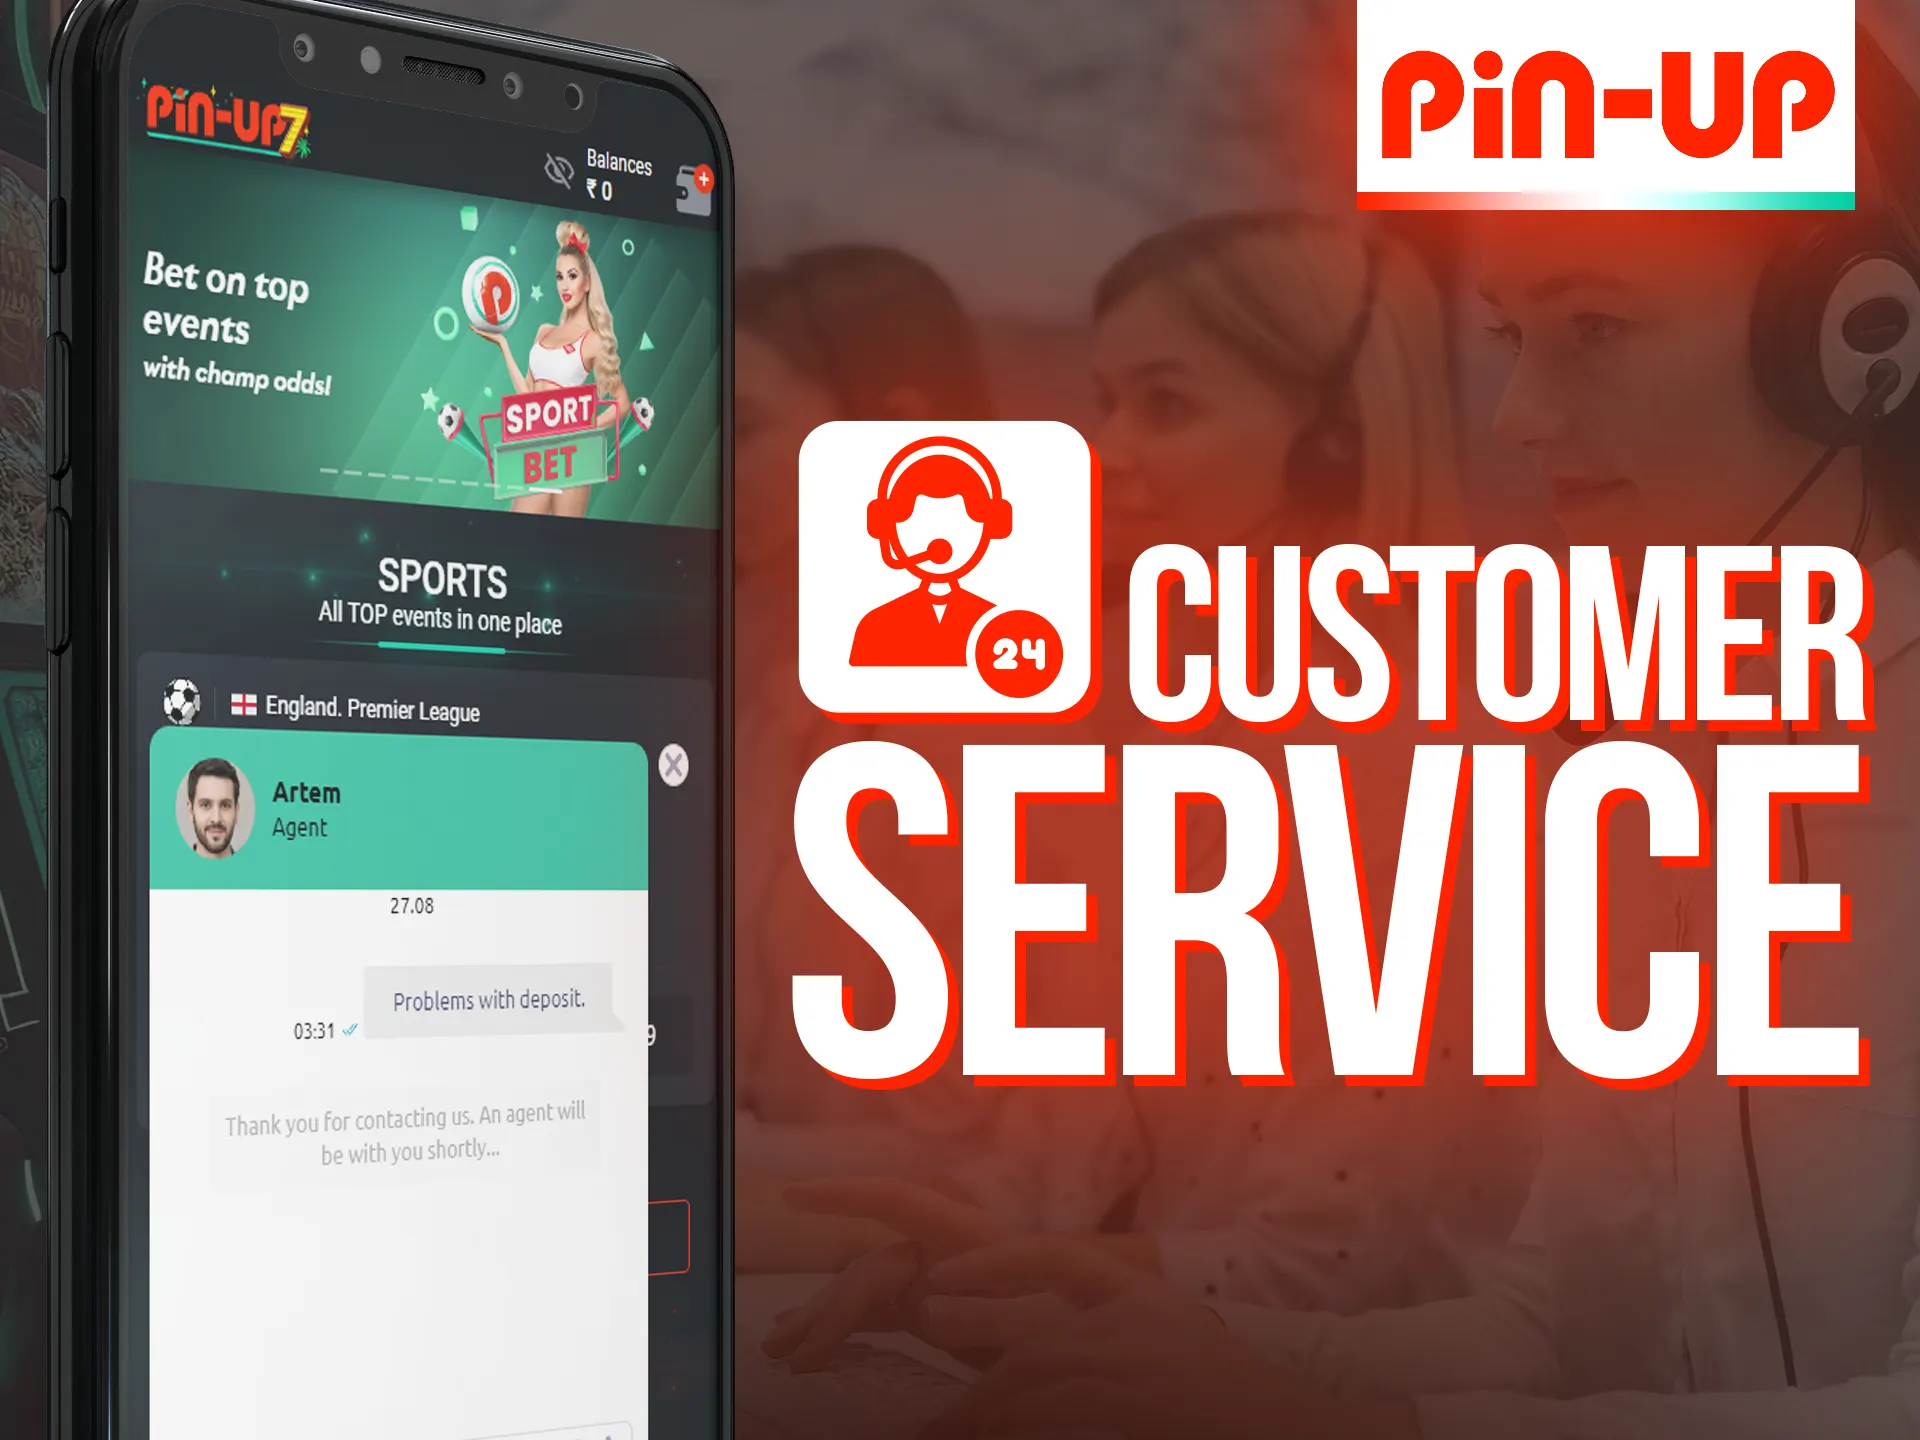 Pin-Up's customer support team is always available to assist you.